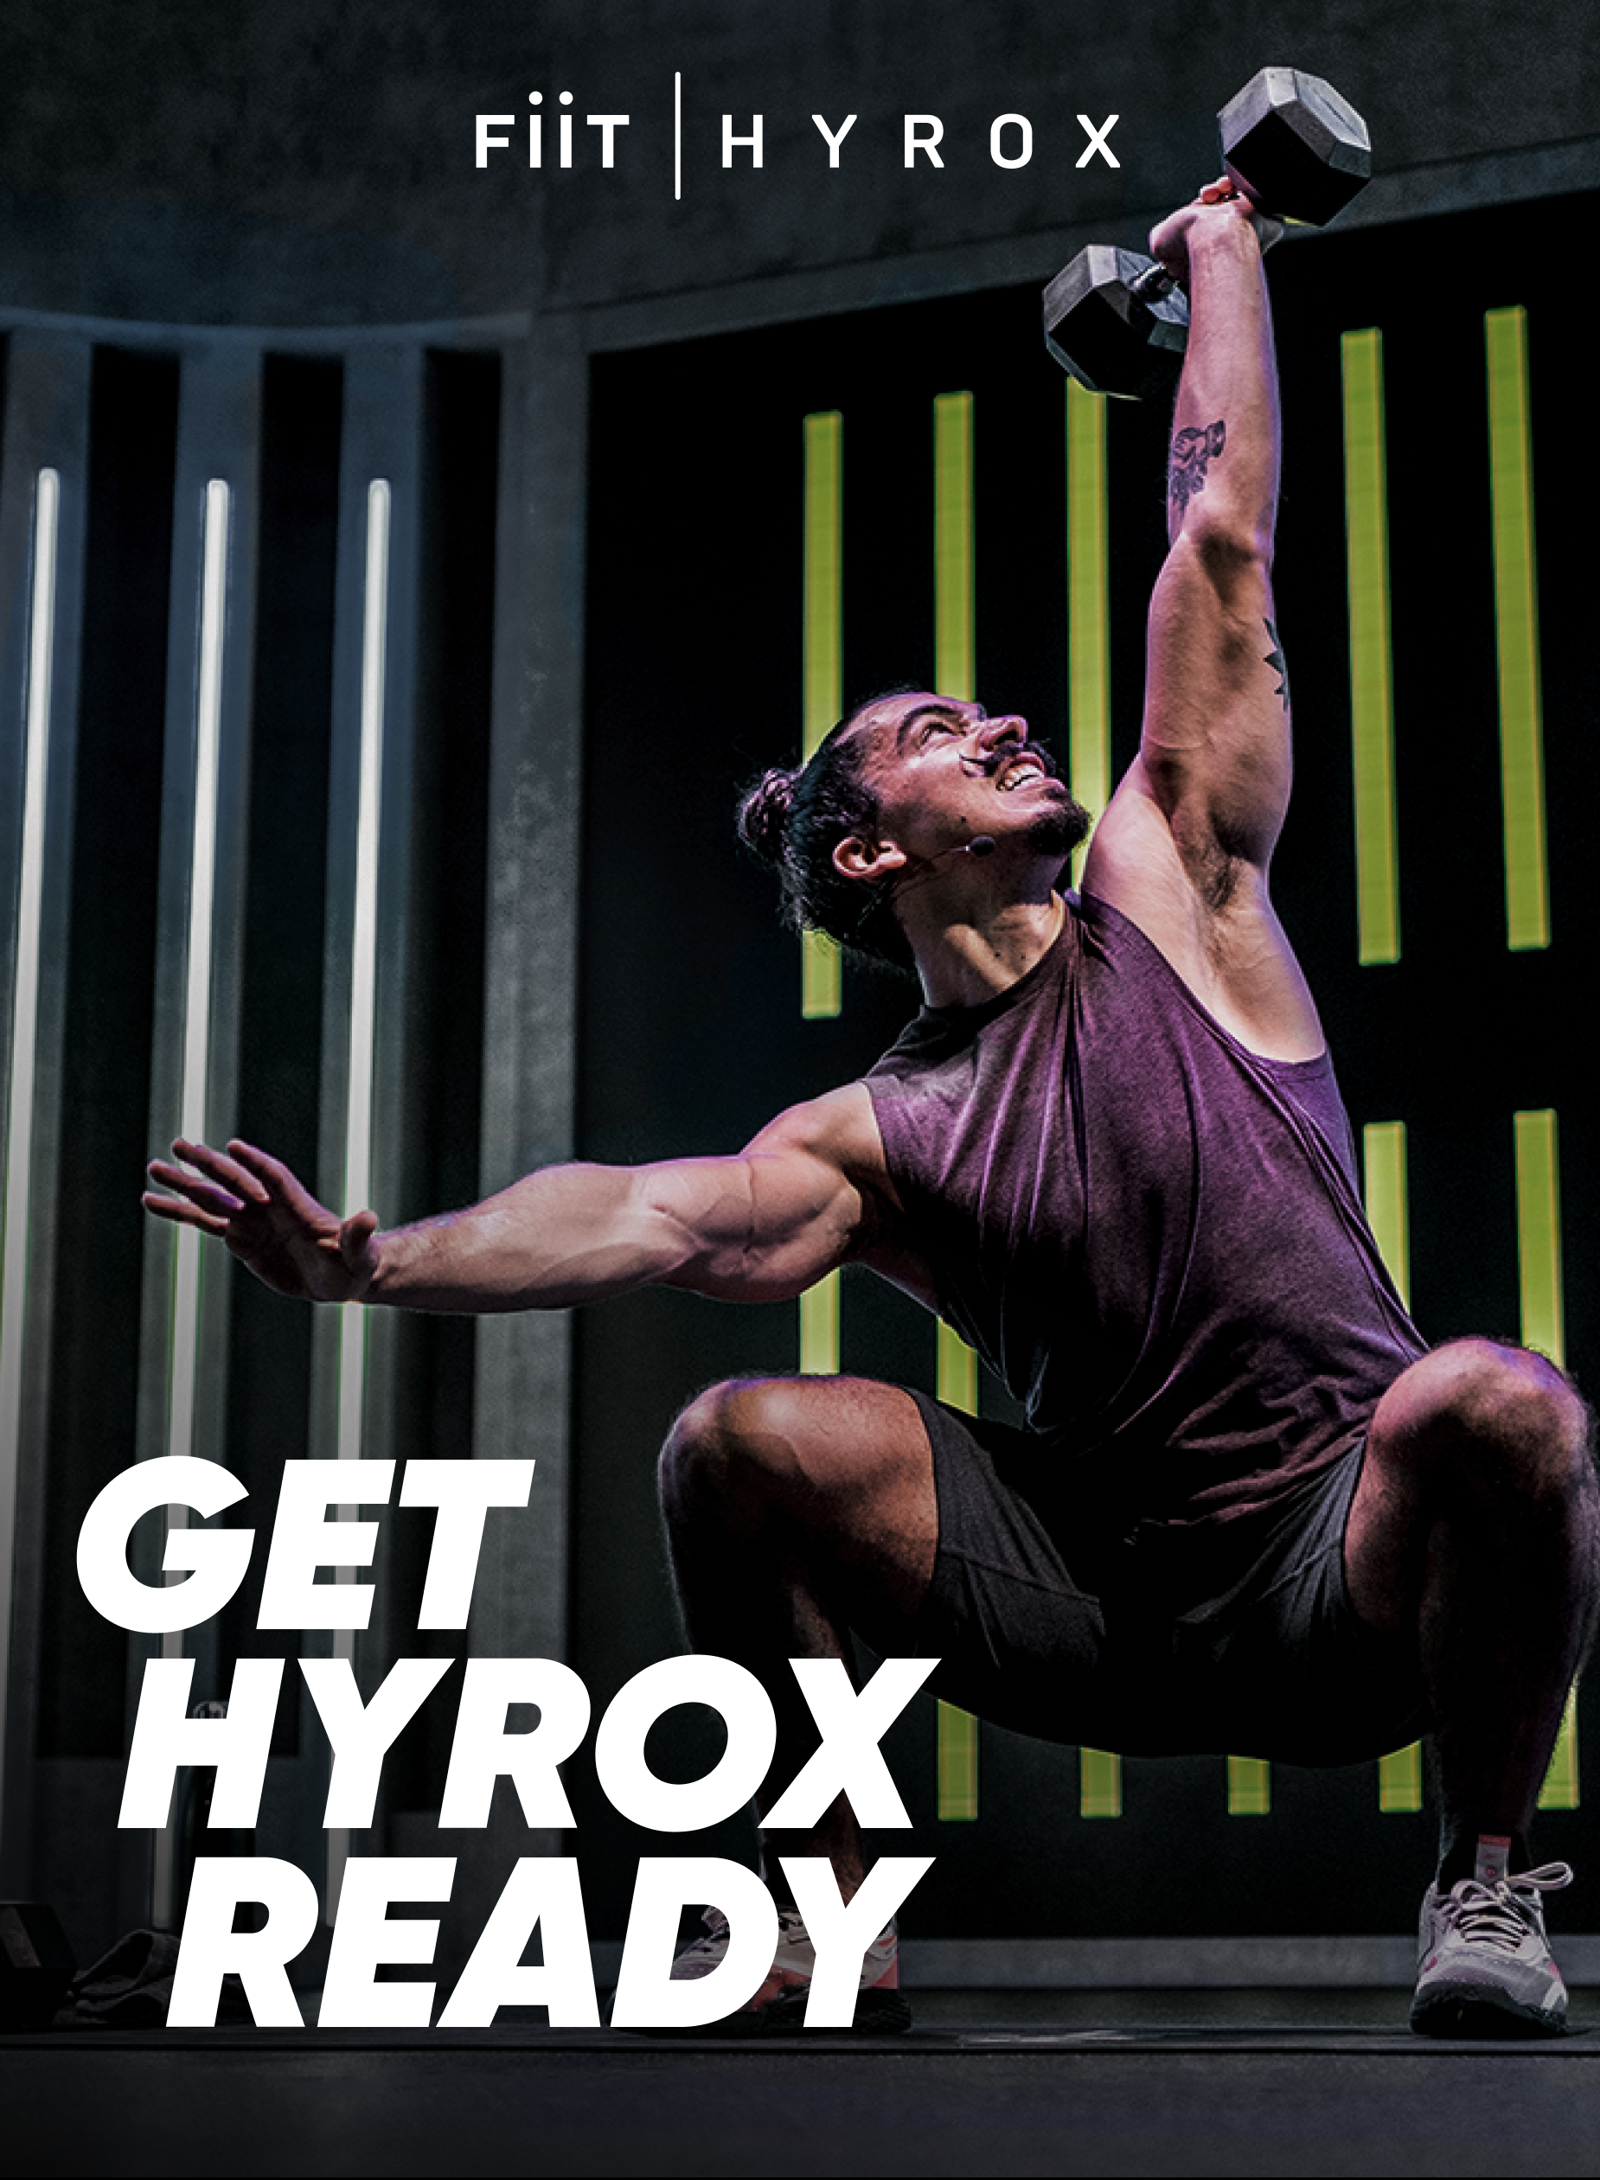 Functional Fitness for Every Body - Why you Must Try HYROX